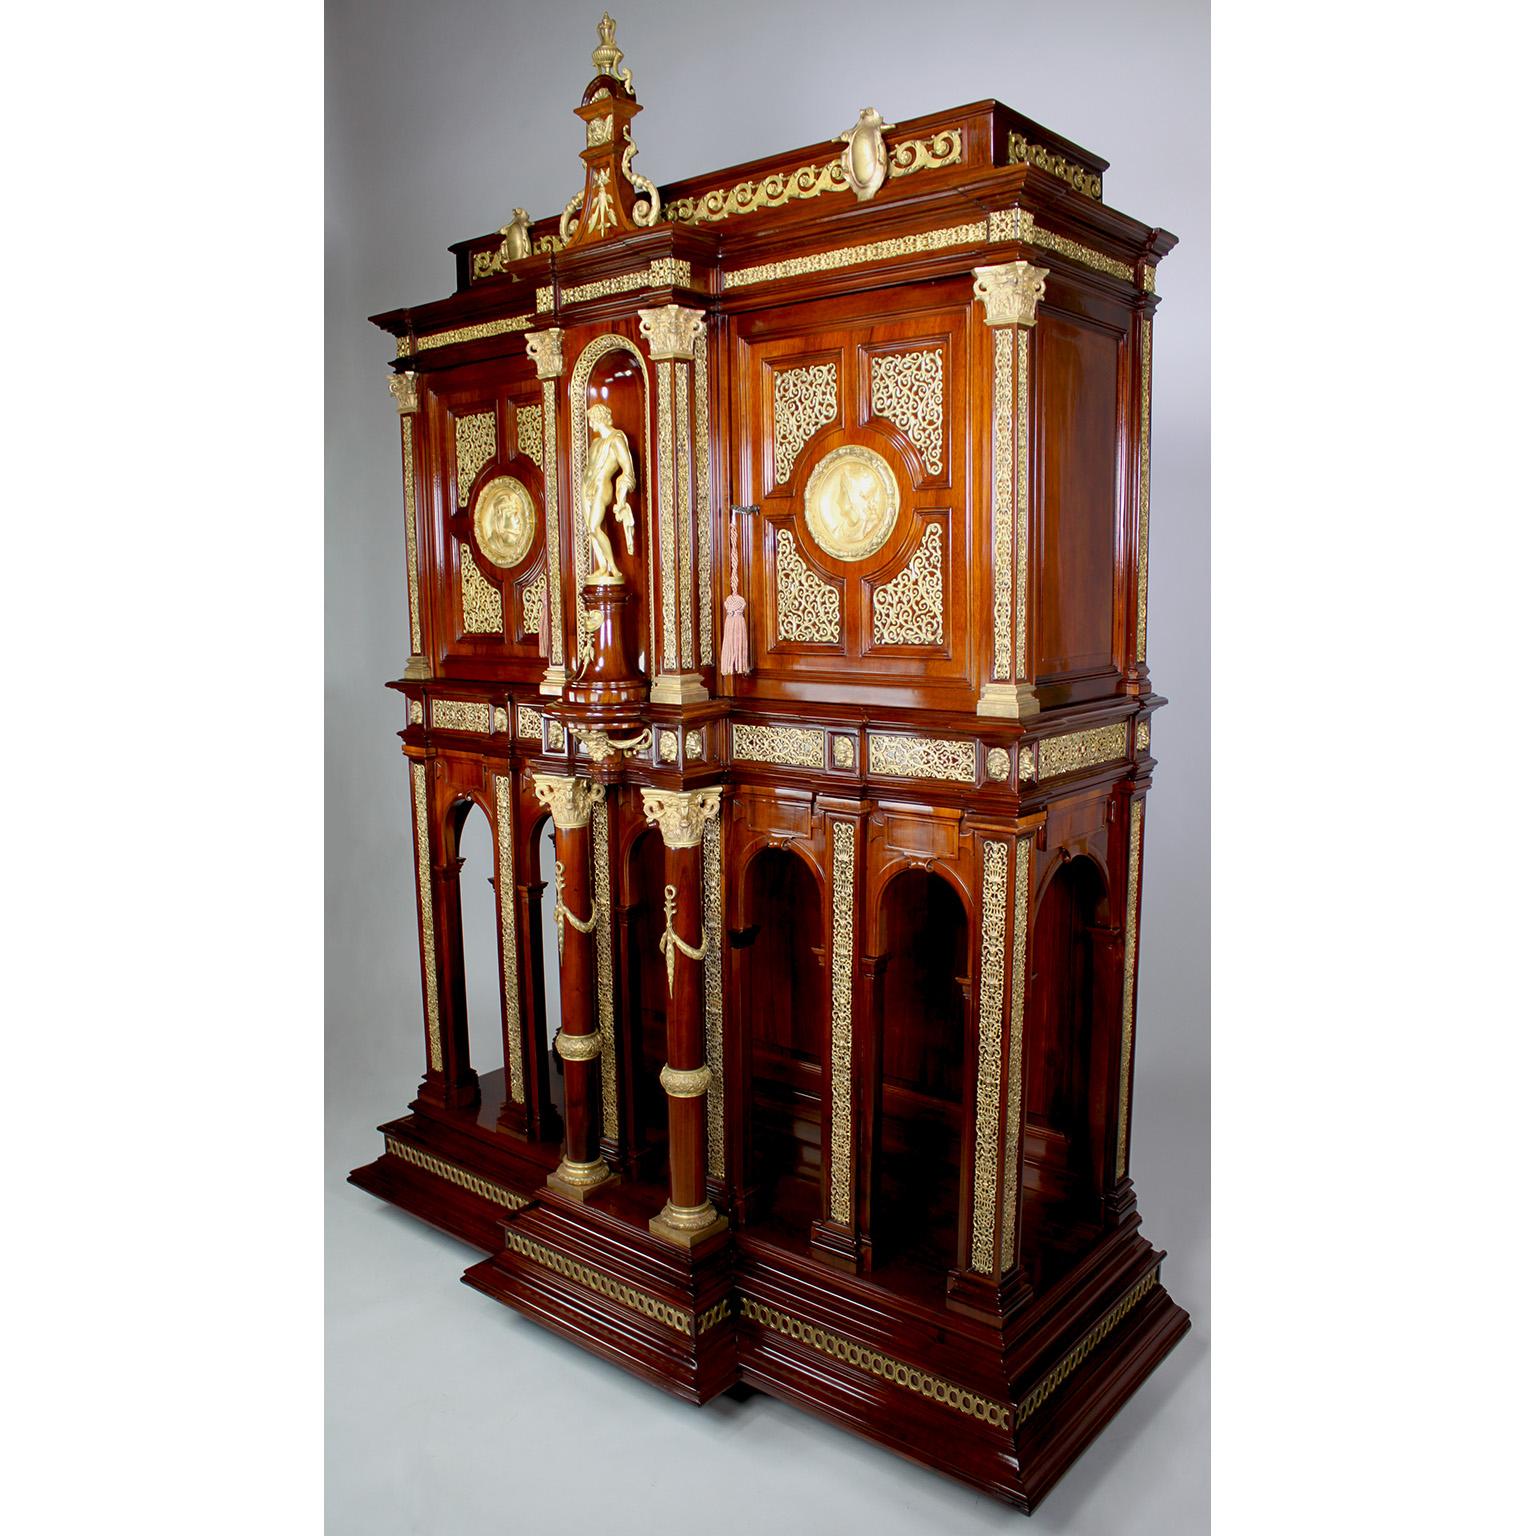 A Fine French 19th Century Neo-Renaissance Style Gilt-Bronze Mounted Walnut and Mahogany Two-Door Bargueno or Cabinet on Stand, attributed to Paul Sormani (1817-1877), designed Édouard Lièvre (1828-1886) and retailed by Poujol - Paris. The spreading